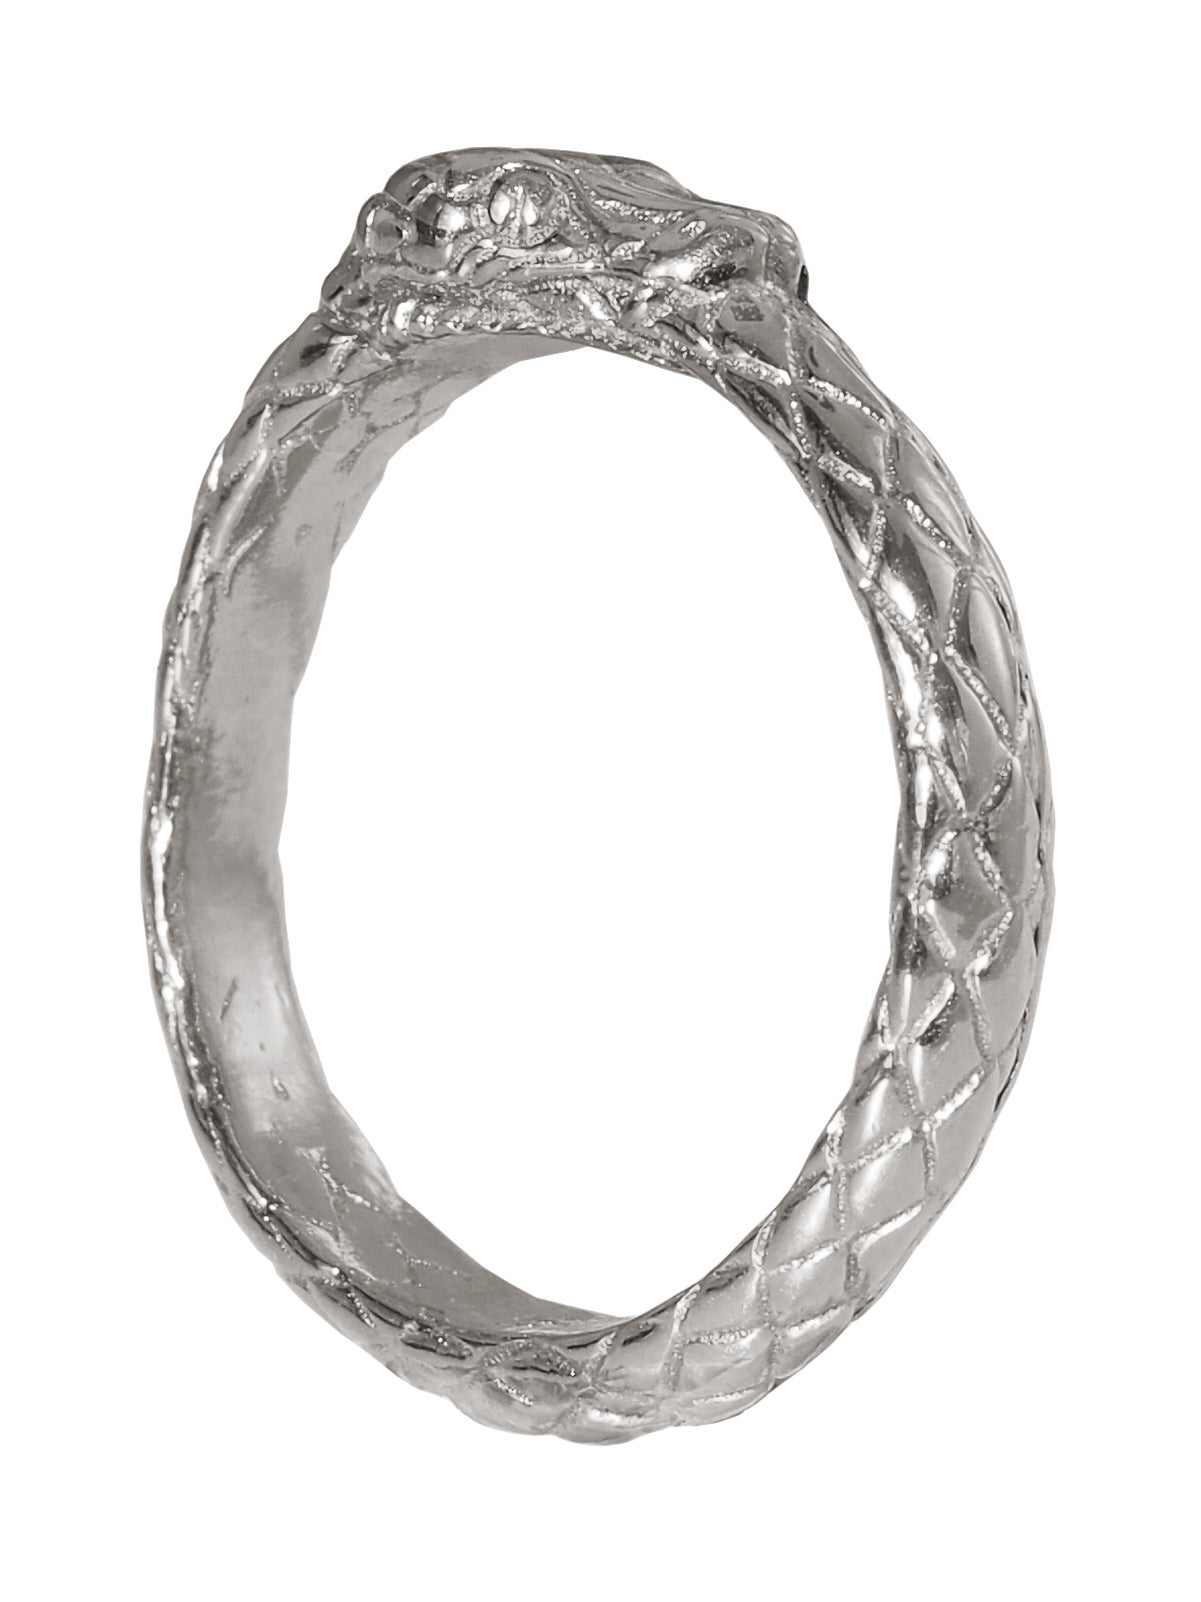 Ouroboros Ring. Silver Plated. Gender Neutral